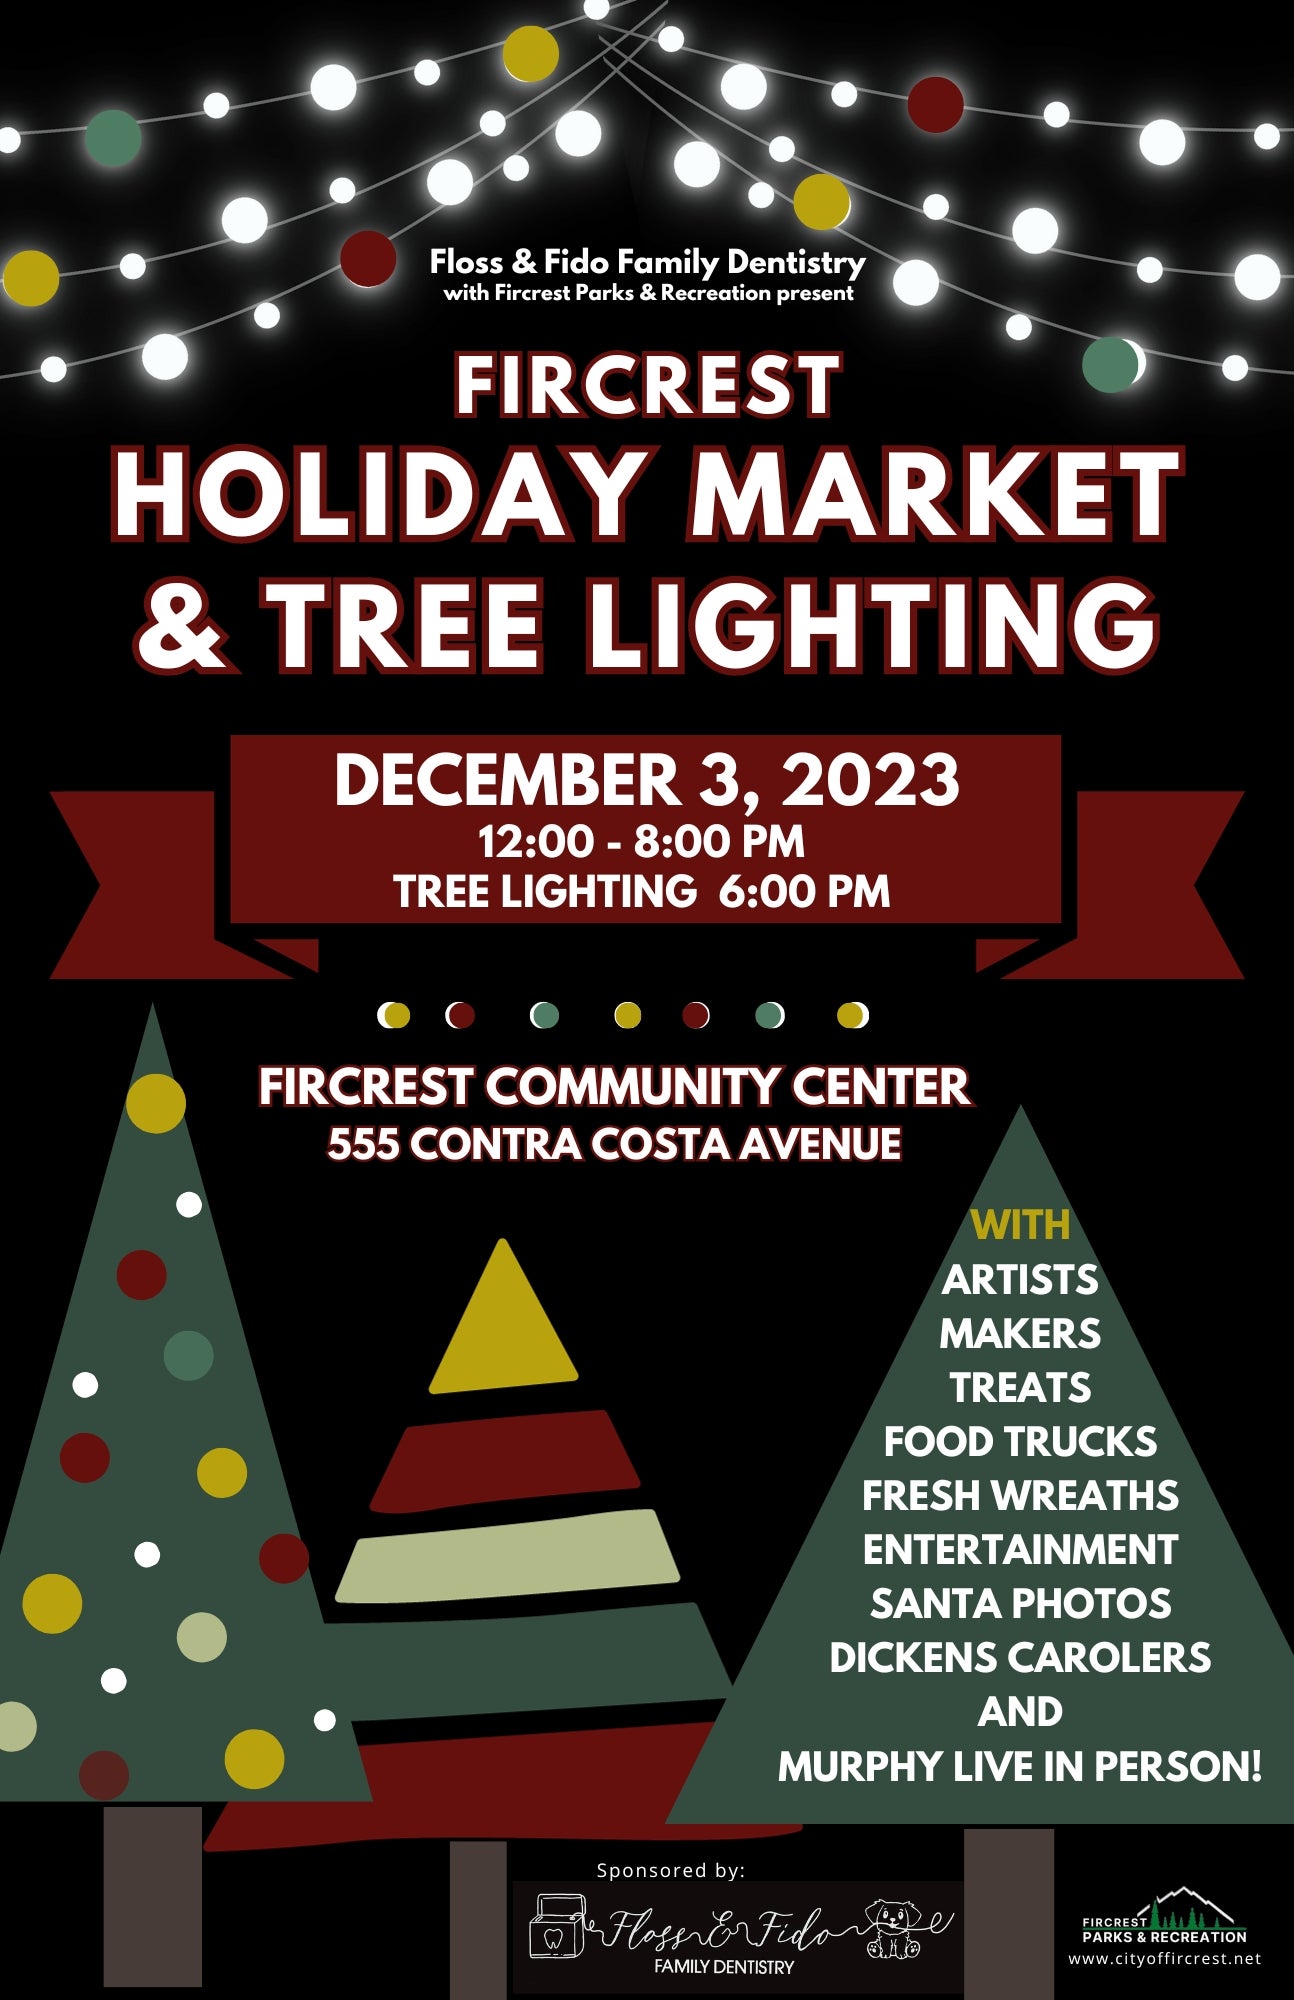 Event poster for the Fircrest Holiday Market and Tree Lighting with string lights, trees with lights, and information about the event (described below)